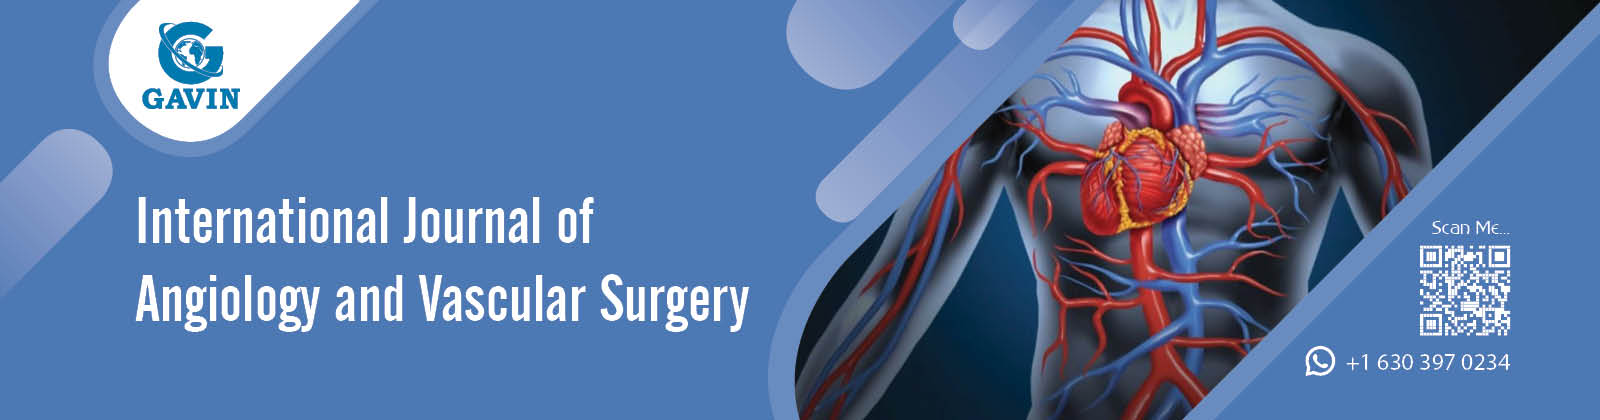 International Journal of Angiology and Vascular Surgery